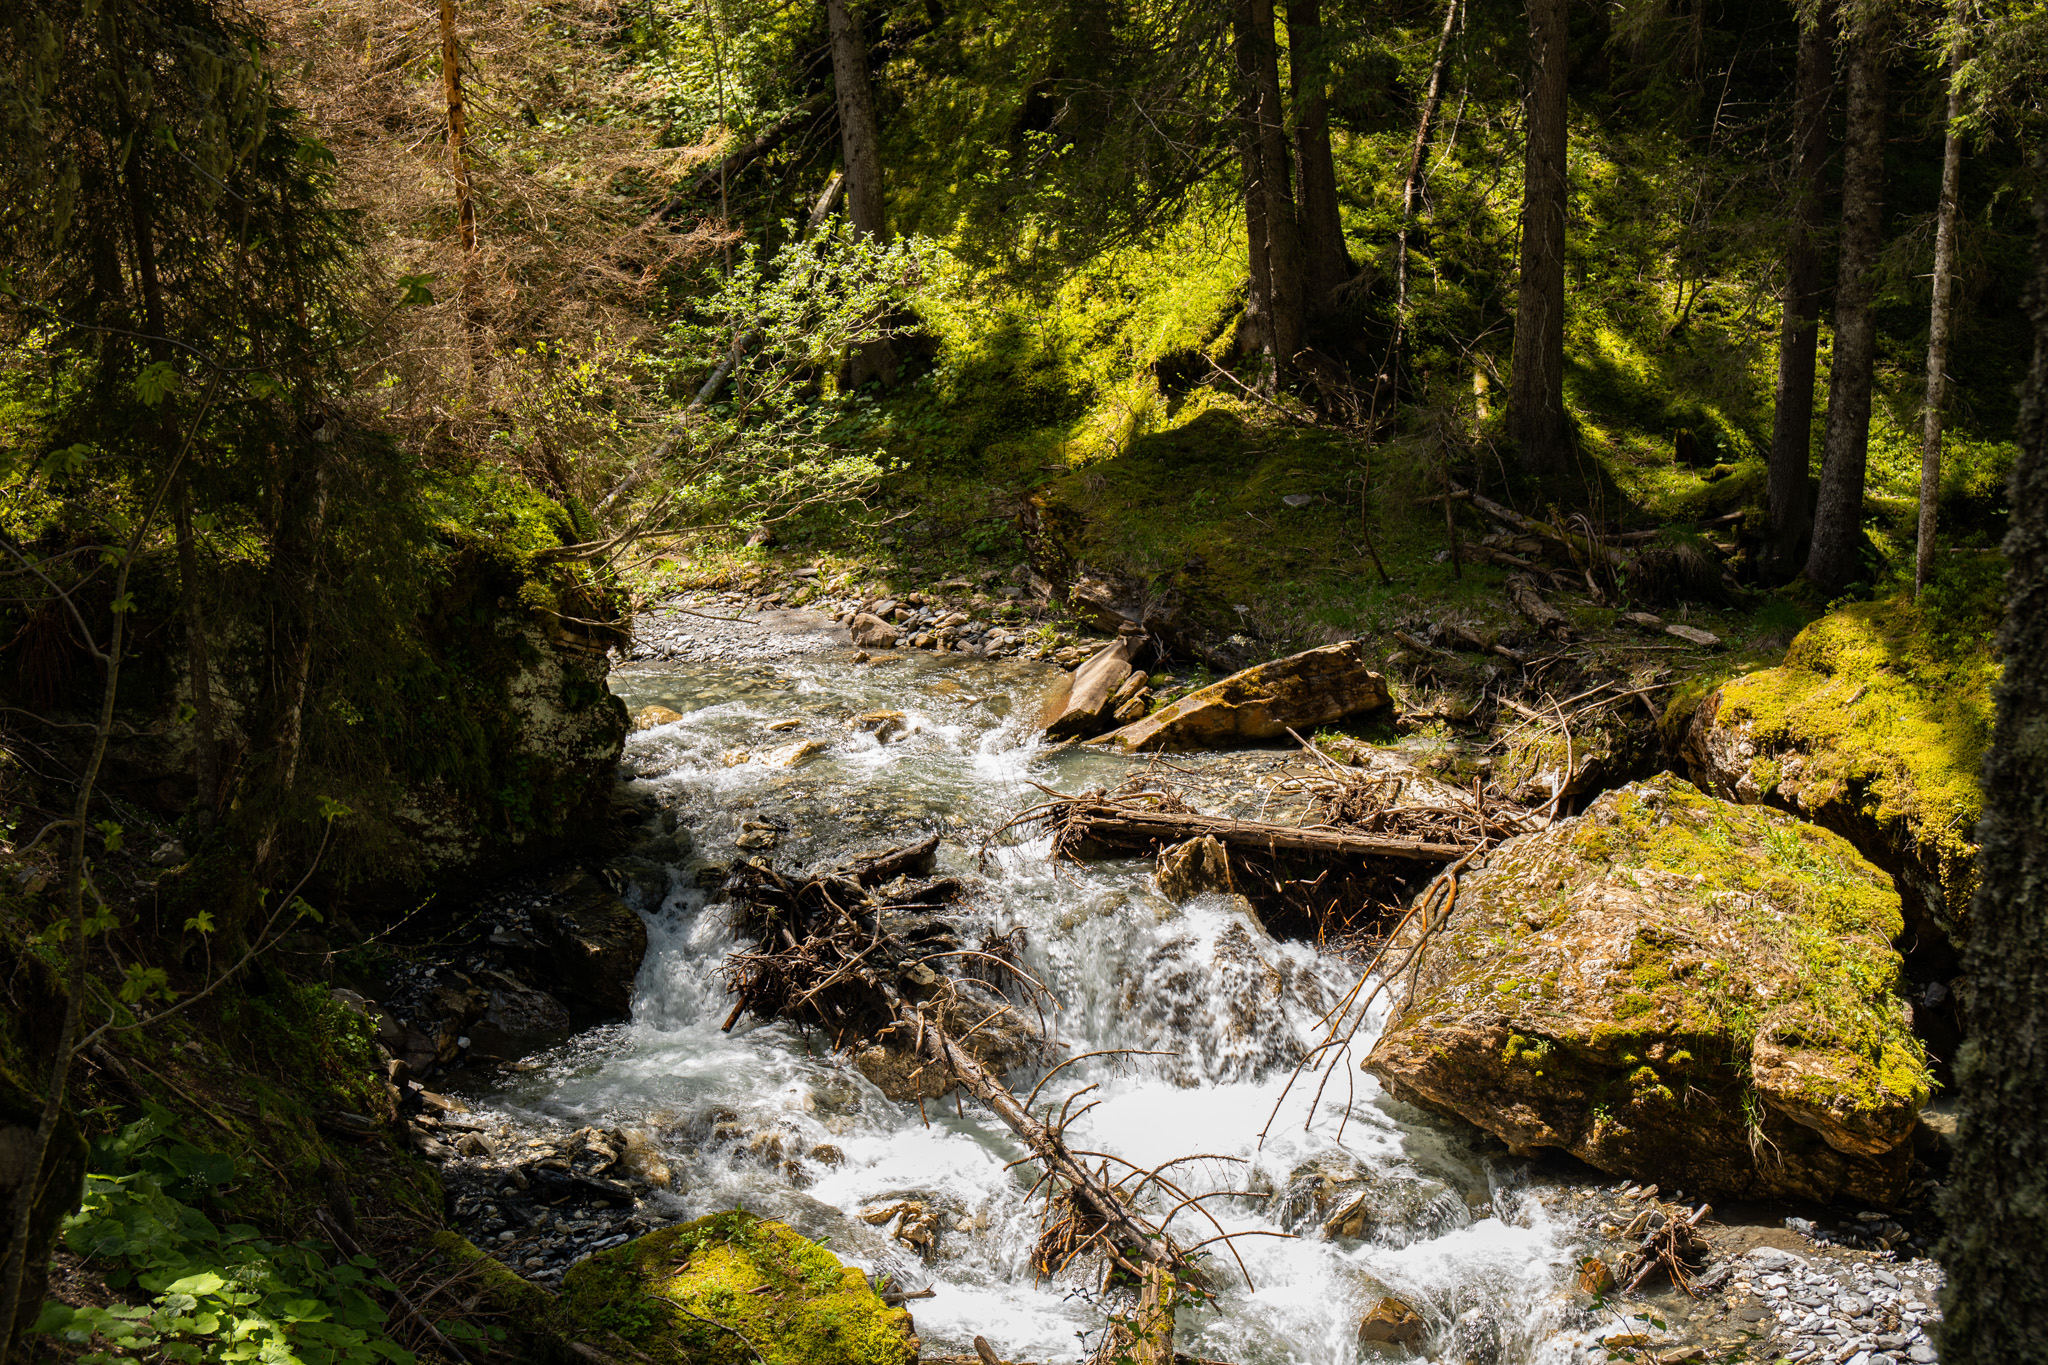 Outdoors Nature Photography Greenery Trees Forest Stream Water Rocks Moss Lichen 2048x1365